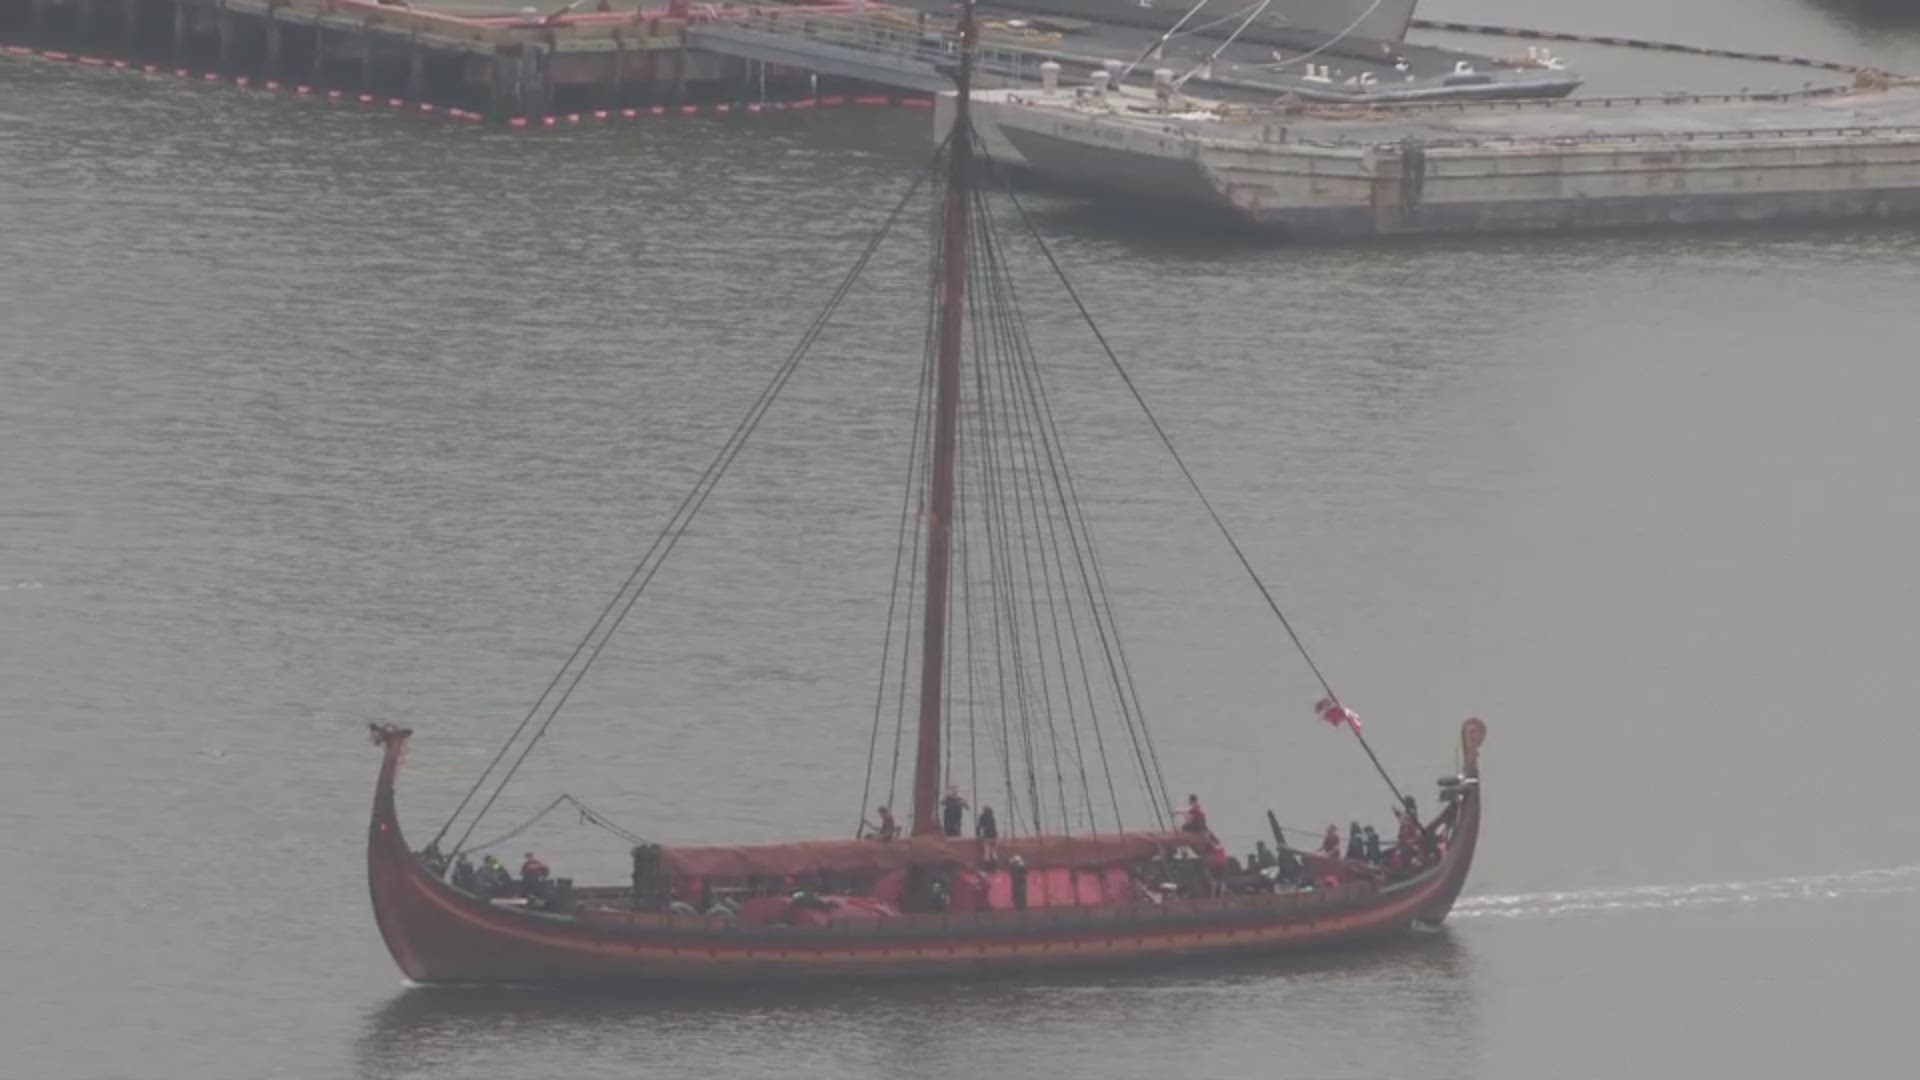 As the Viking ship Draken Harald Hårfagre made its way to its stop at Nauticus in Norfolk, Virginia, a pod of dolphins came up from the water to greet it.